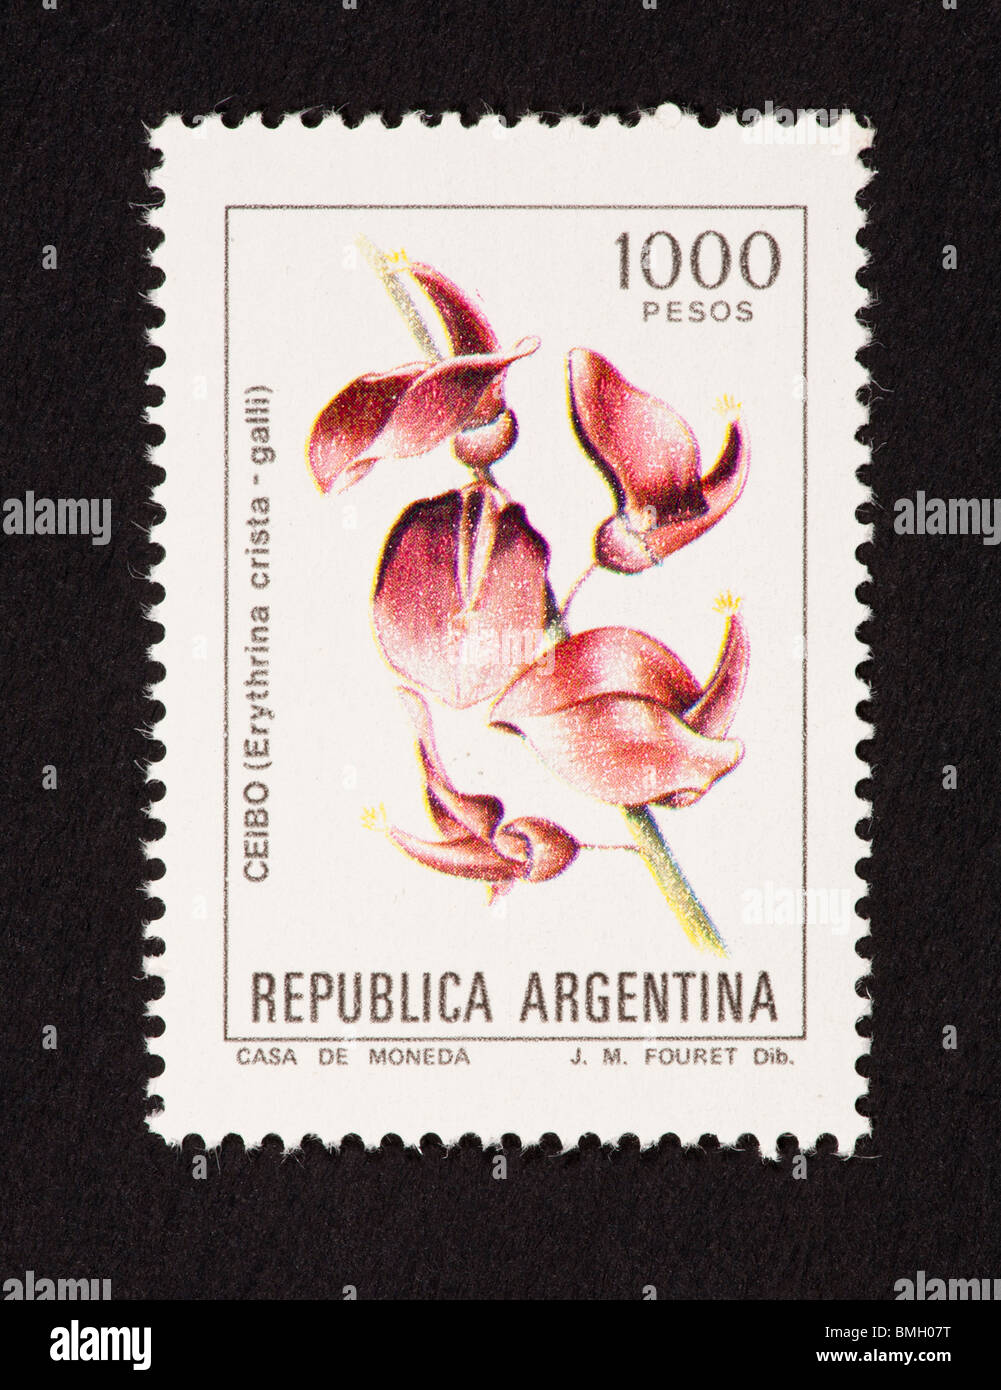 Postage stamp from Argentina depicting a flower (Erythrina cristagalli) Stock Photo